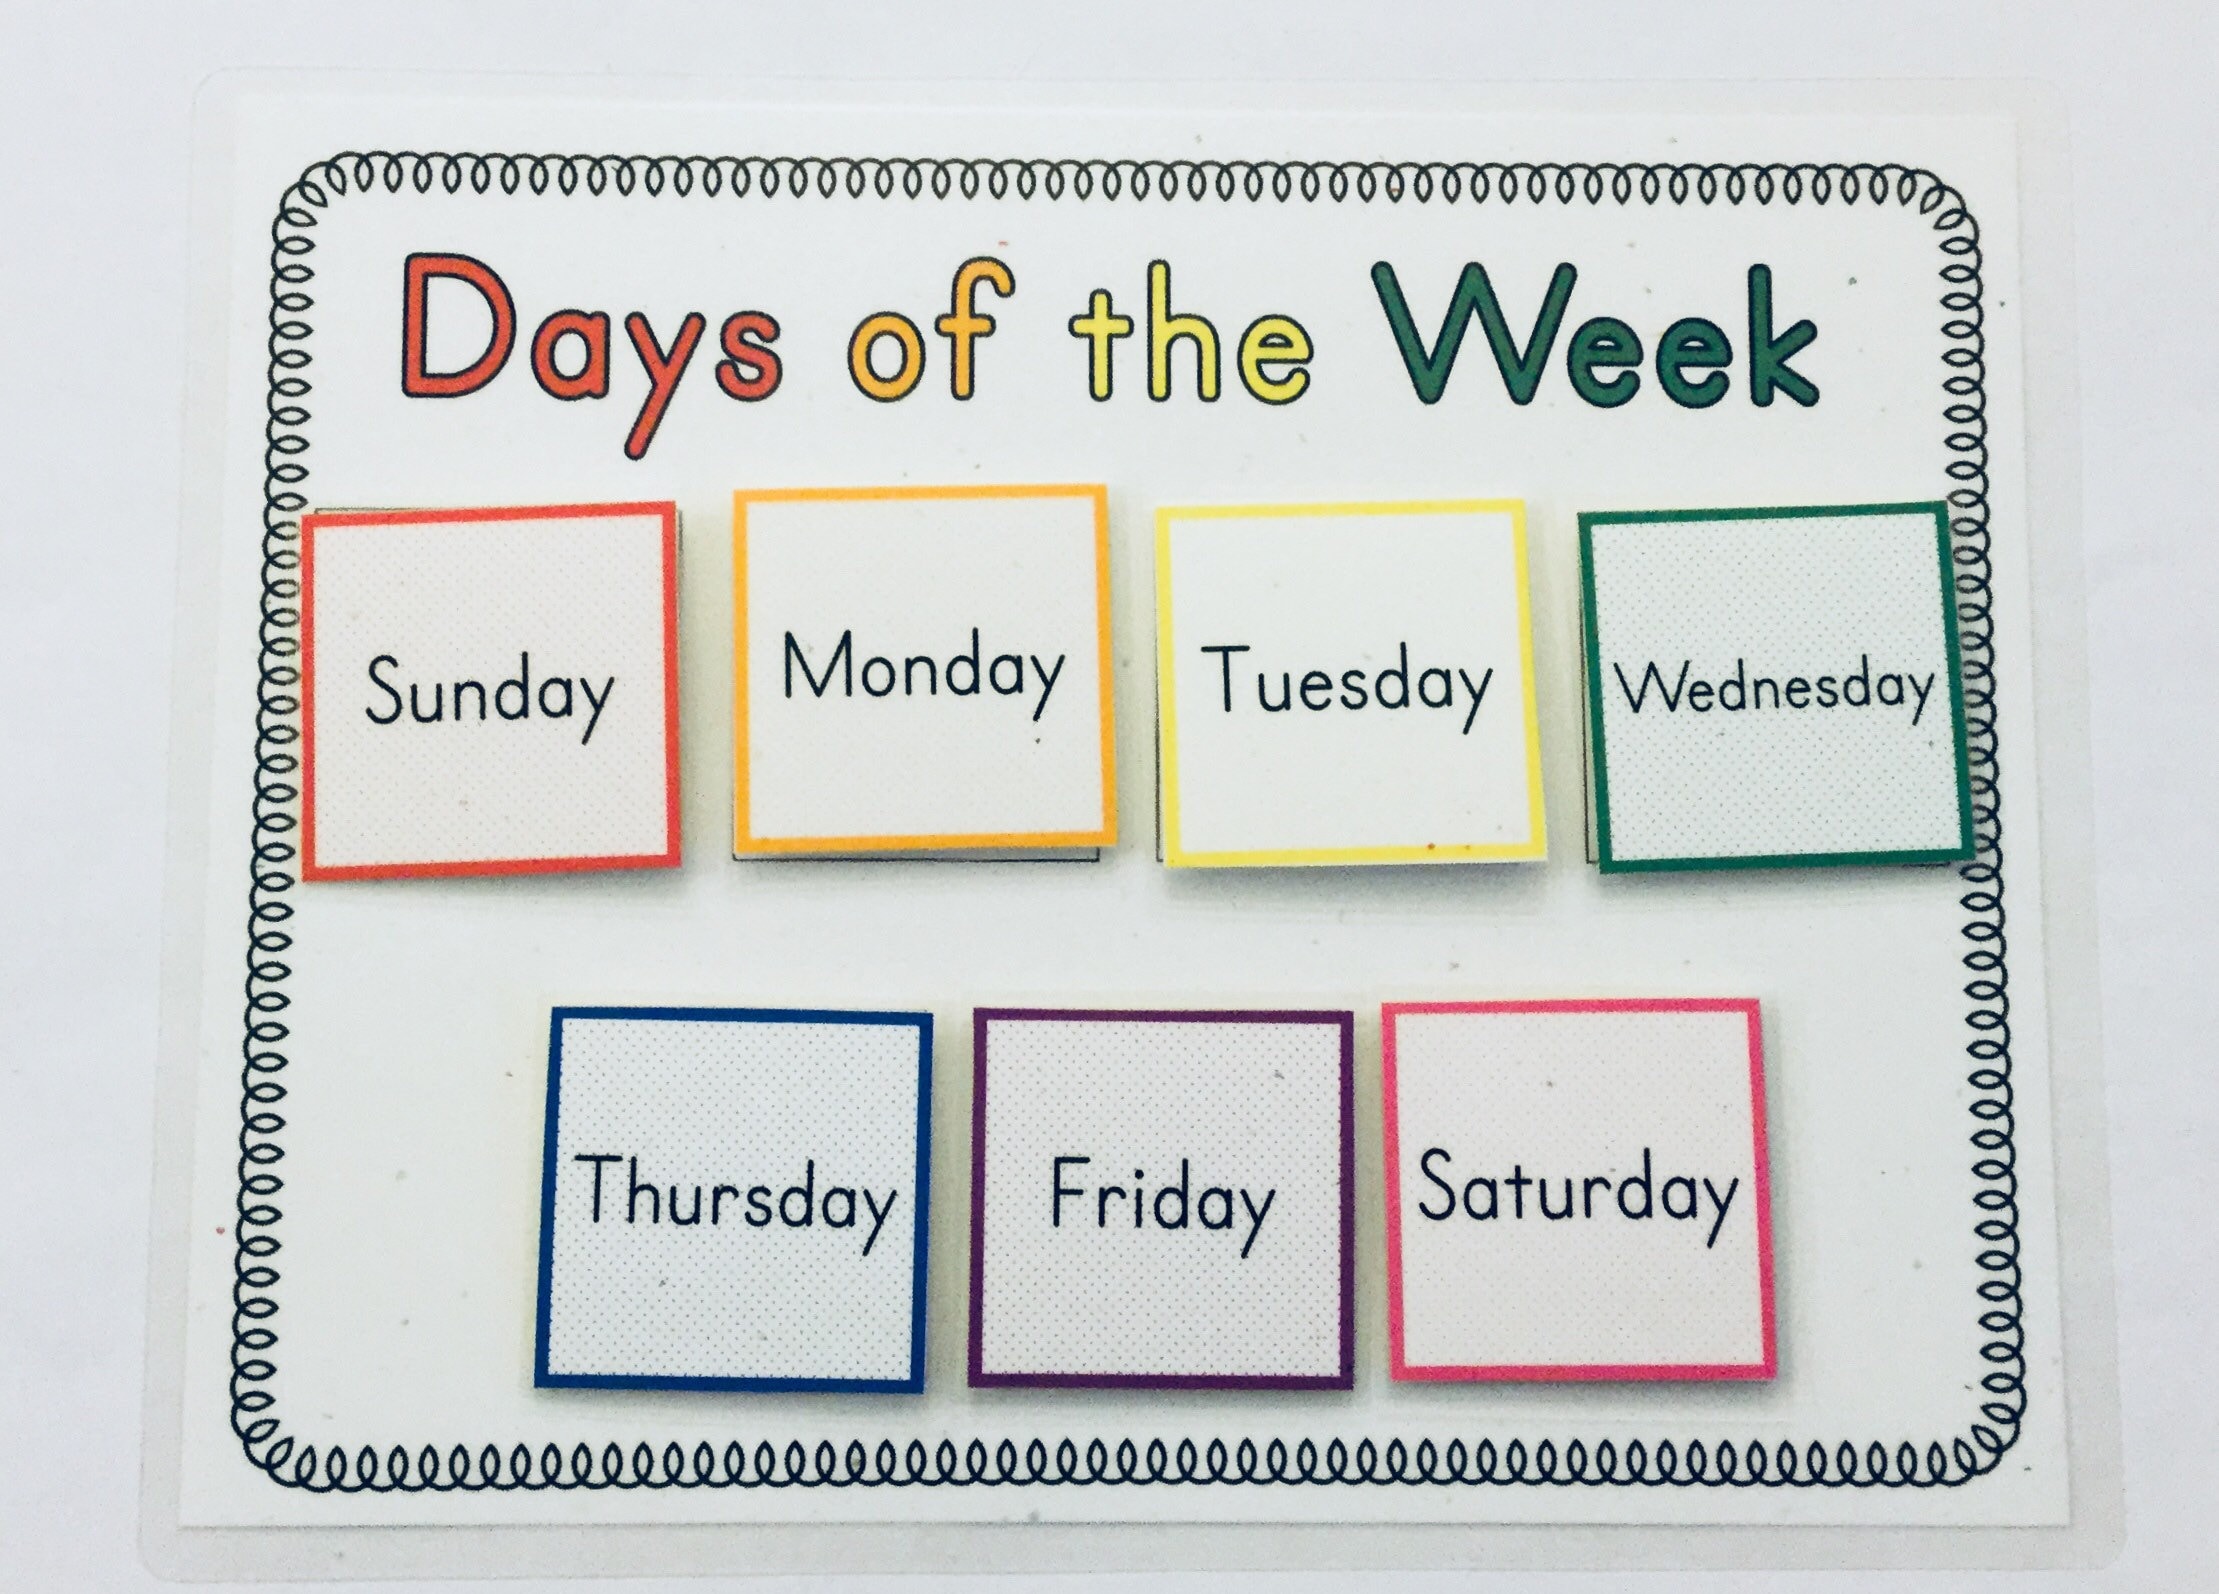 Week это. Days of the week. Days of the week игра. Days of the week картинки. Карточки Days of the week.